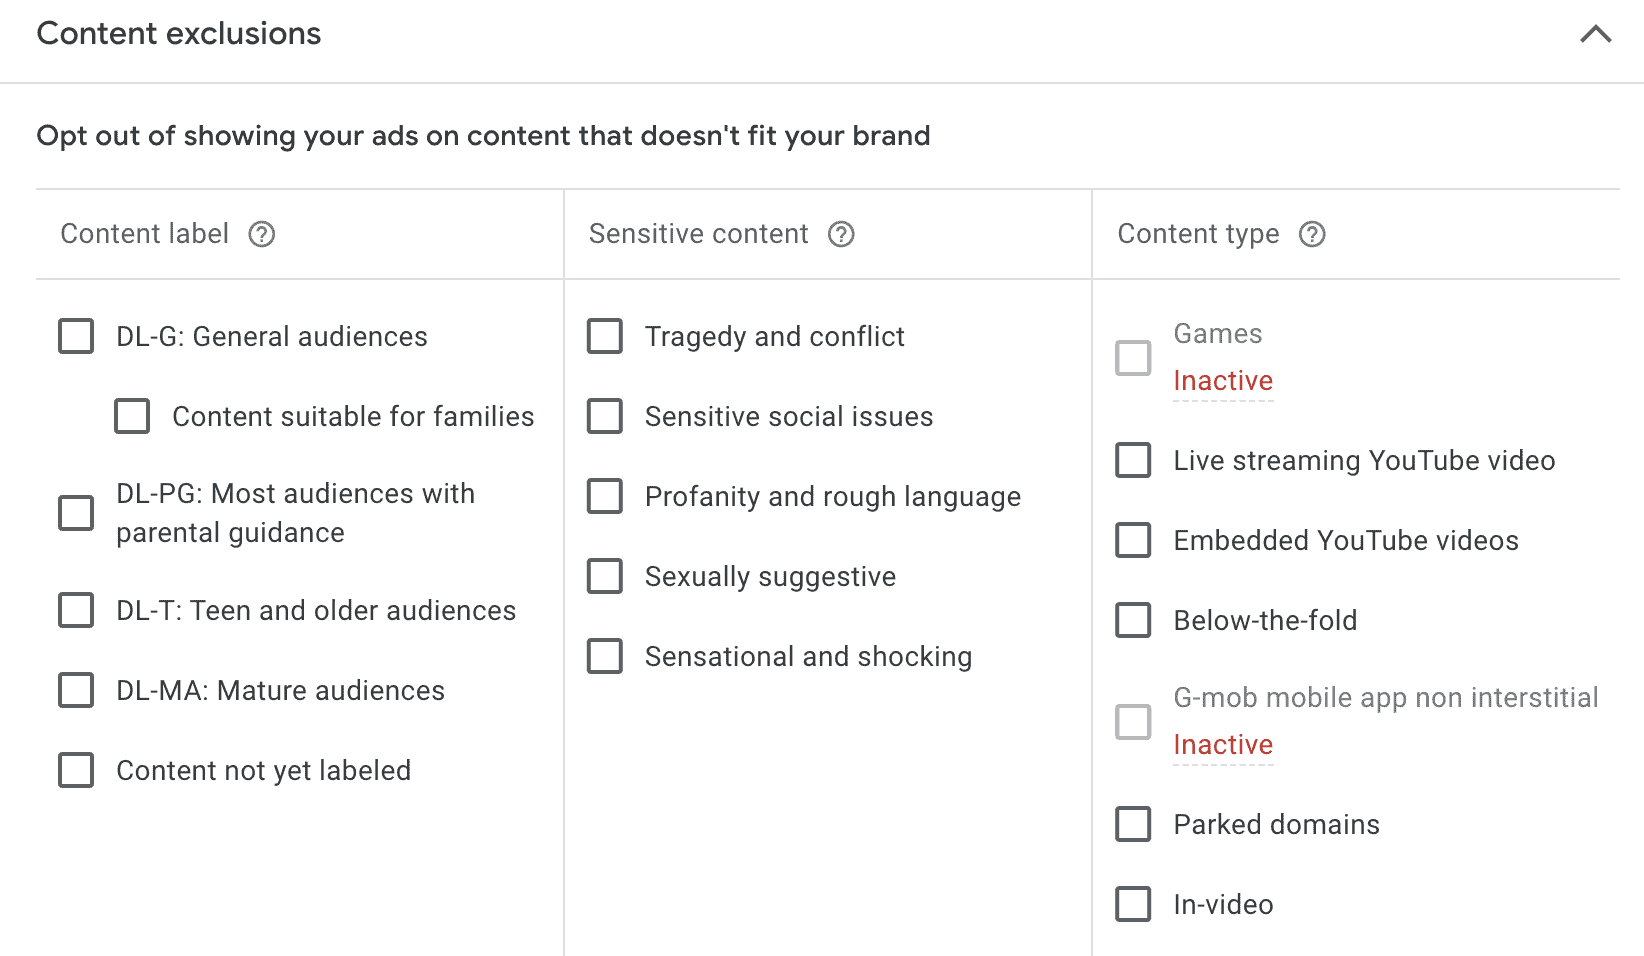 Google Ads content exclusion options to opt out of showing your ads on content that doesn't fit your brand, from games to sensitive content, such as tragedy and profanity